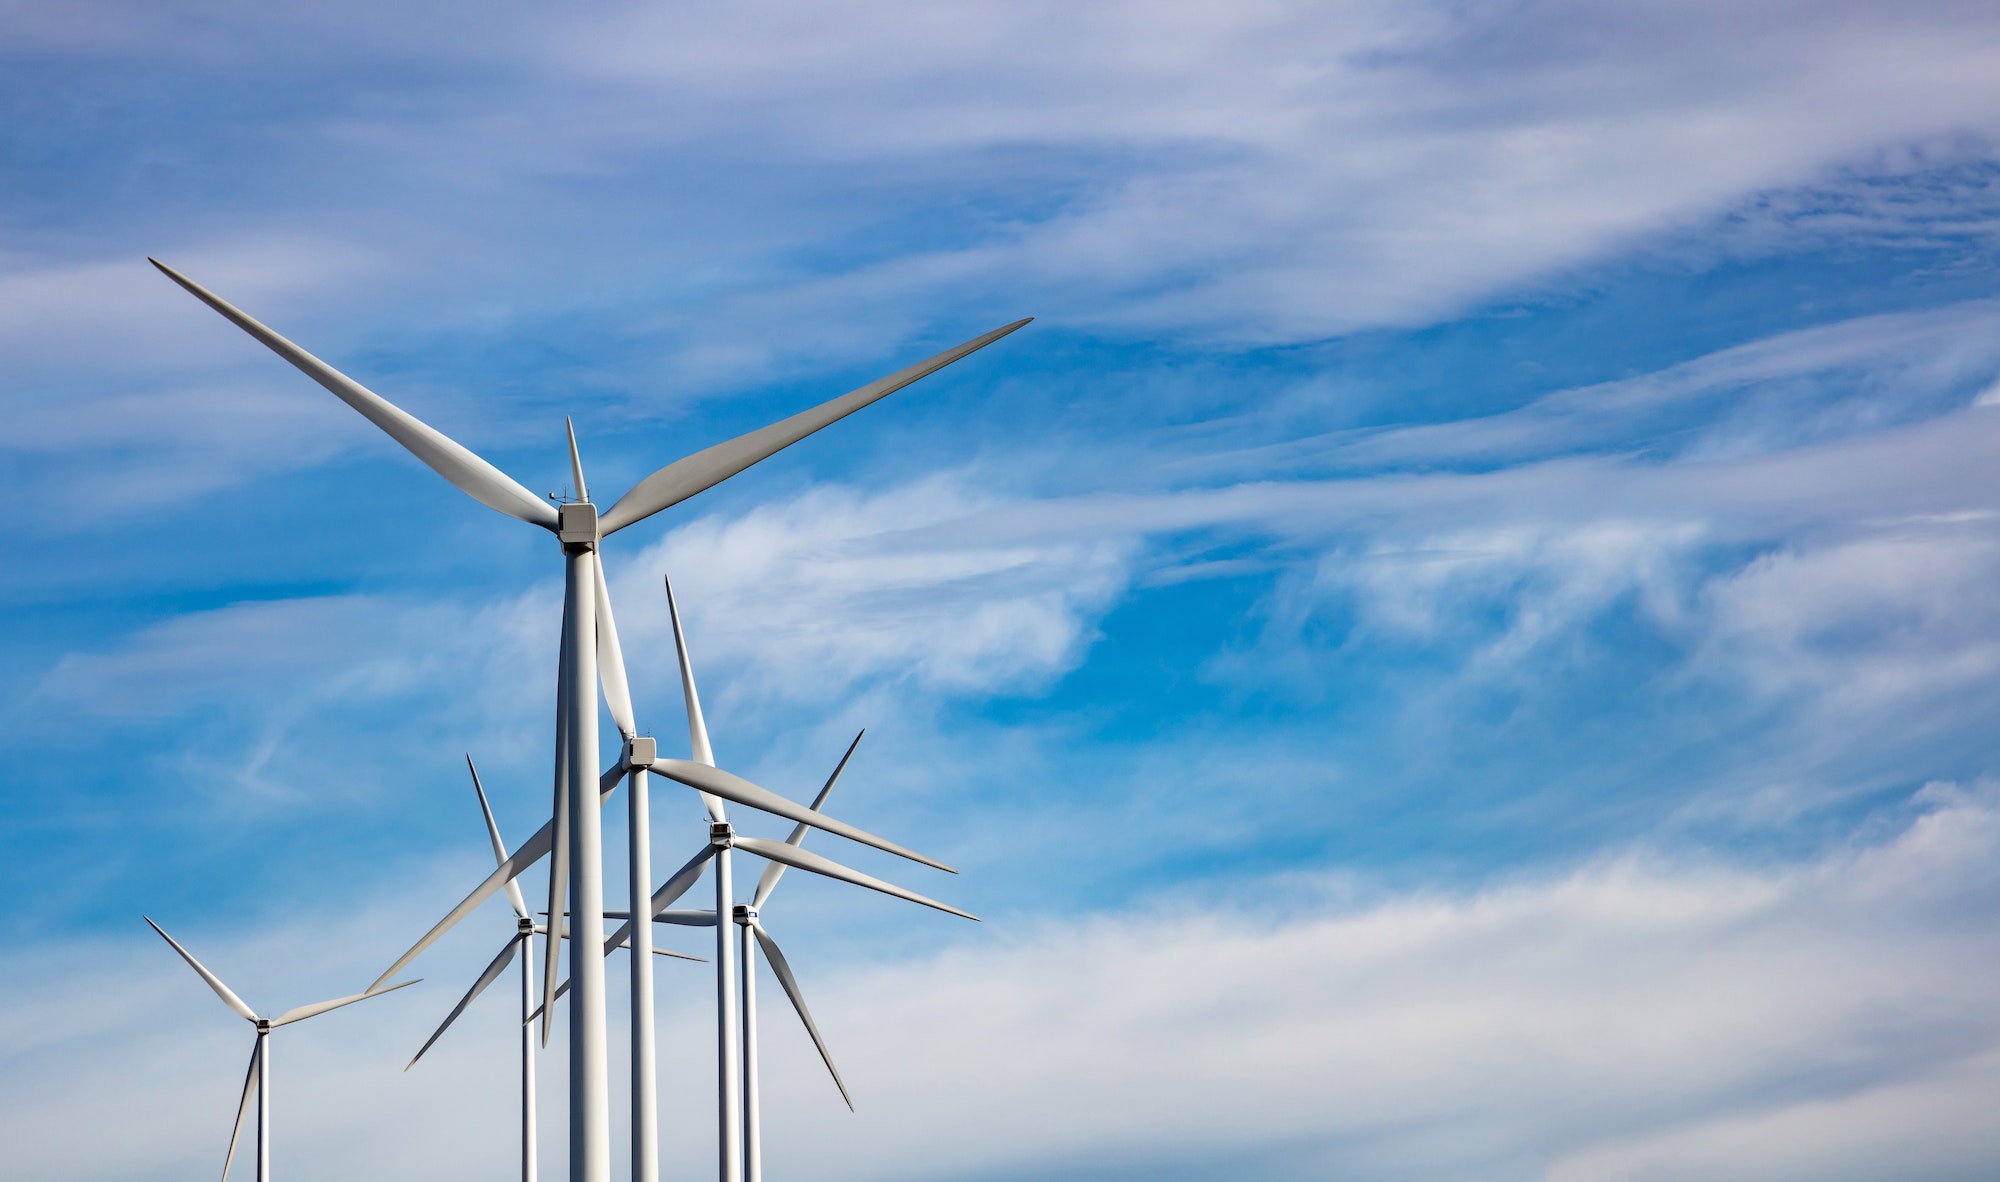 Tops of wind turbines against background of blue sky with wispy clouds